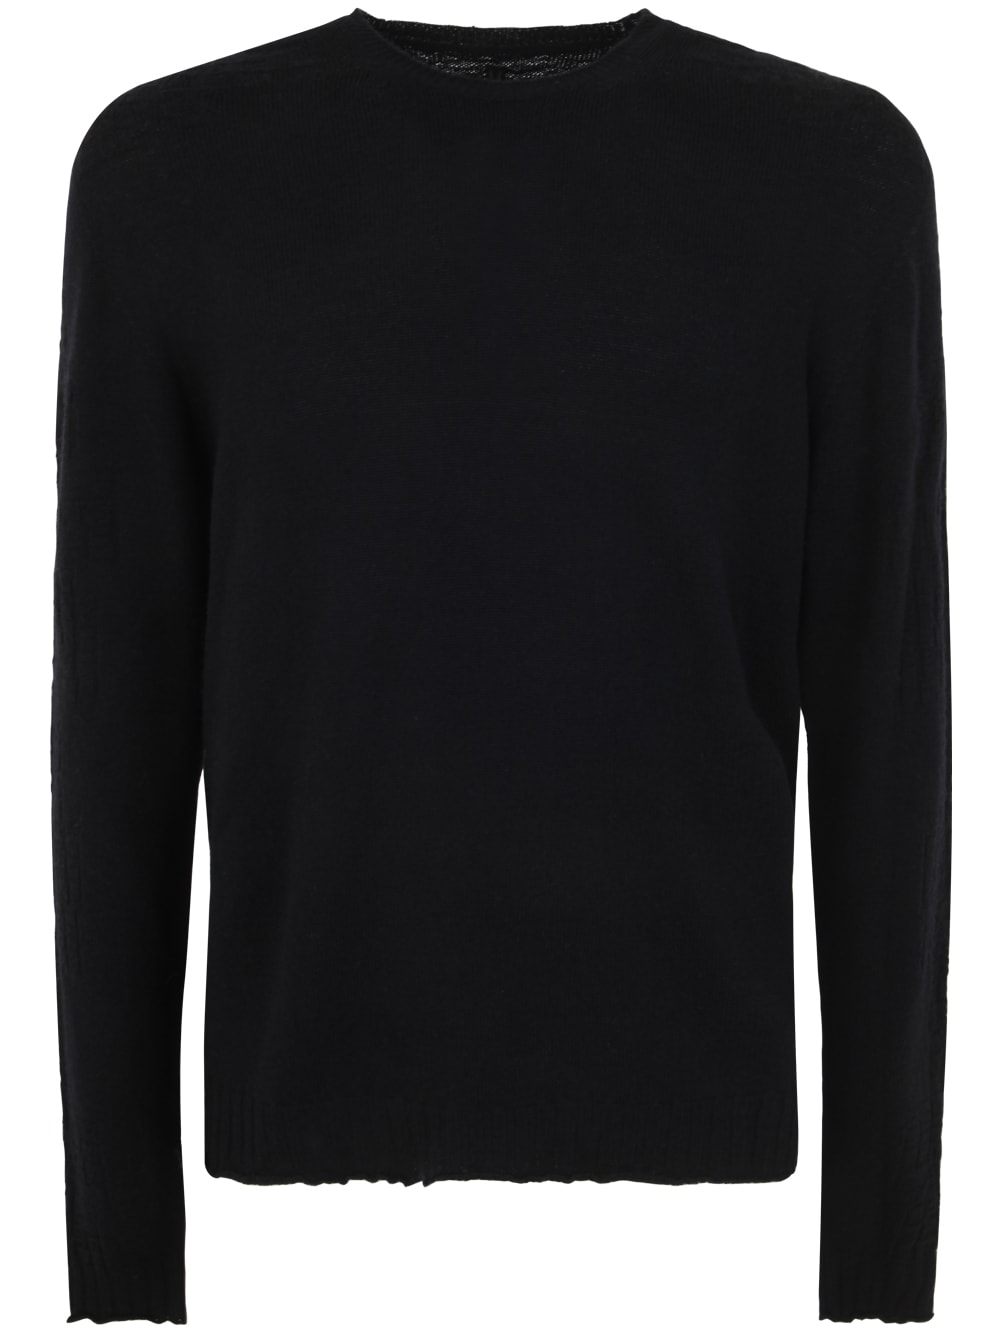 MD75 WOOL AND CASHMERE CREW NECK SWEATER